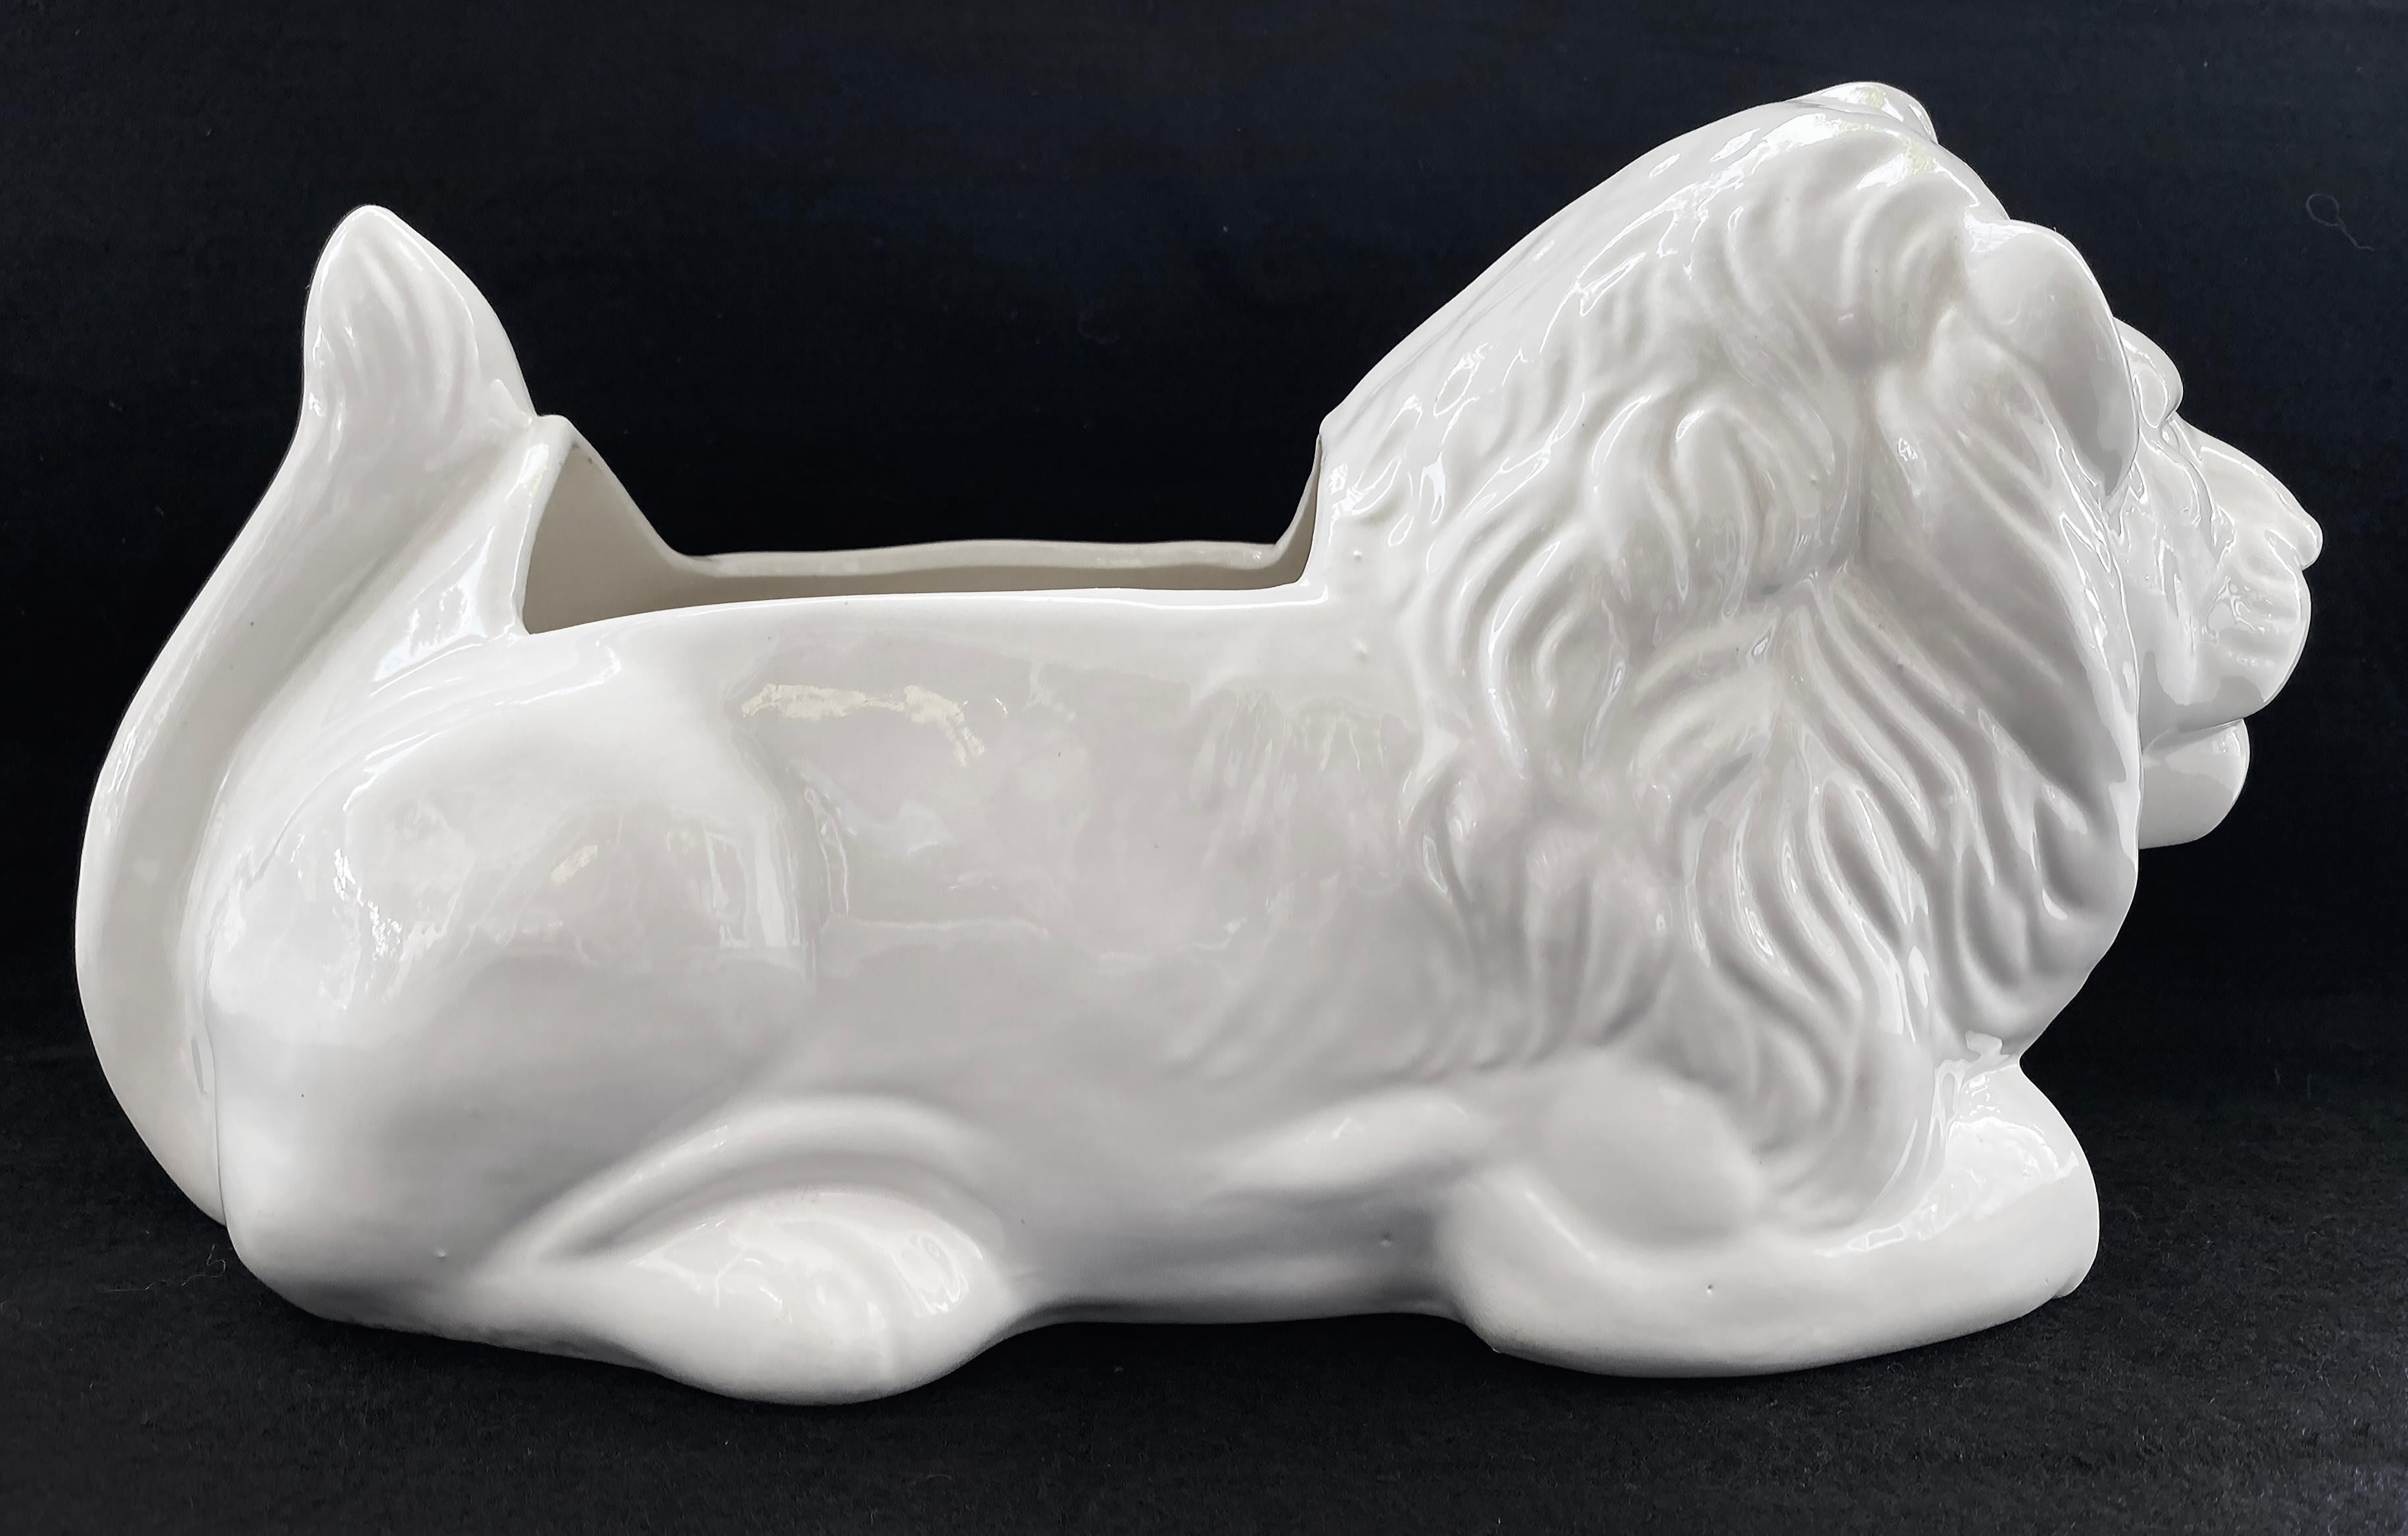 Vintage White  Glazed Ceramic Resting Lion Planter

Offered for sale is a vintage circa 1965 white glazed ceramic lion planter. The lion is positioned in a resting position and the planter is in very good condition with no issues.